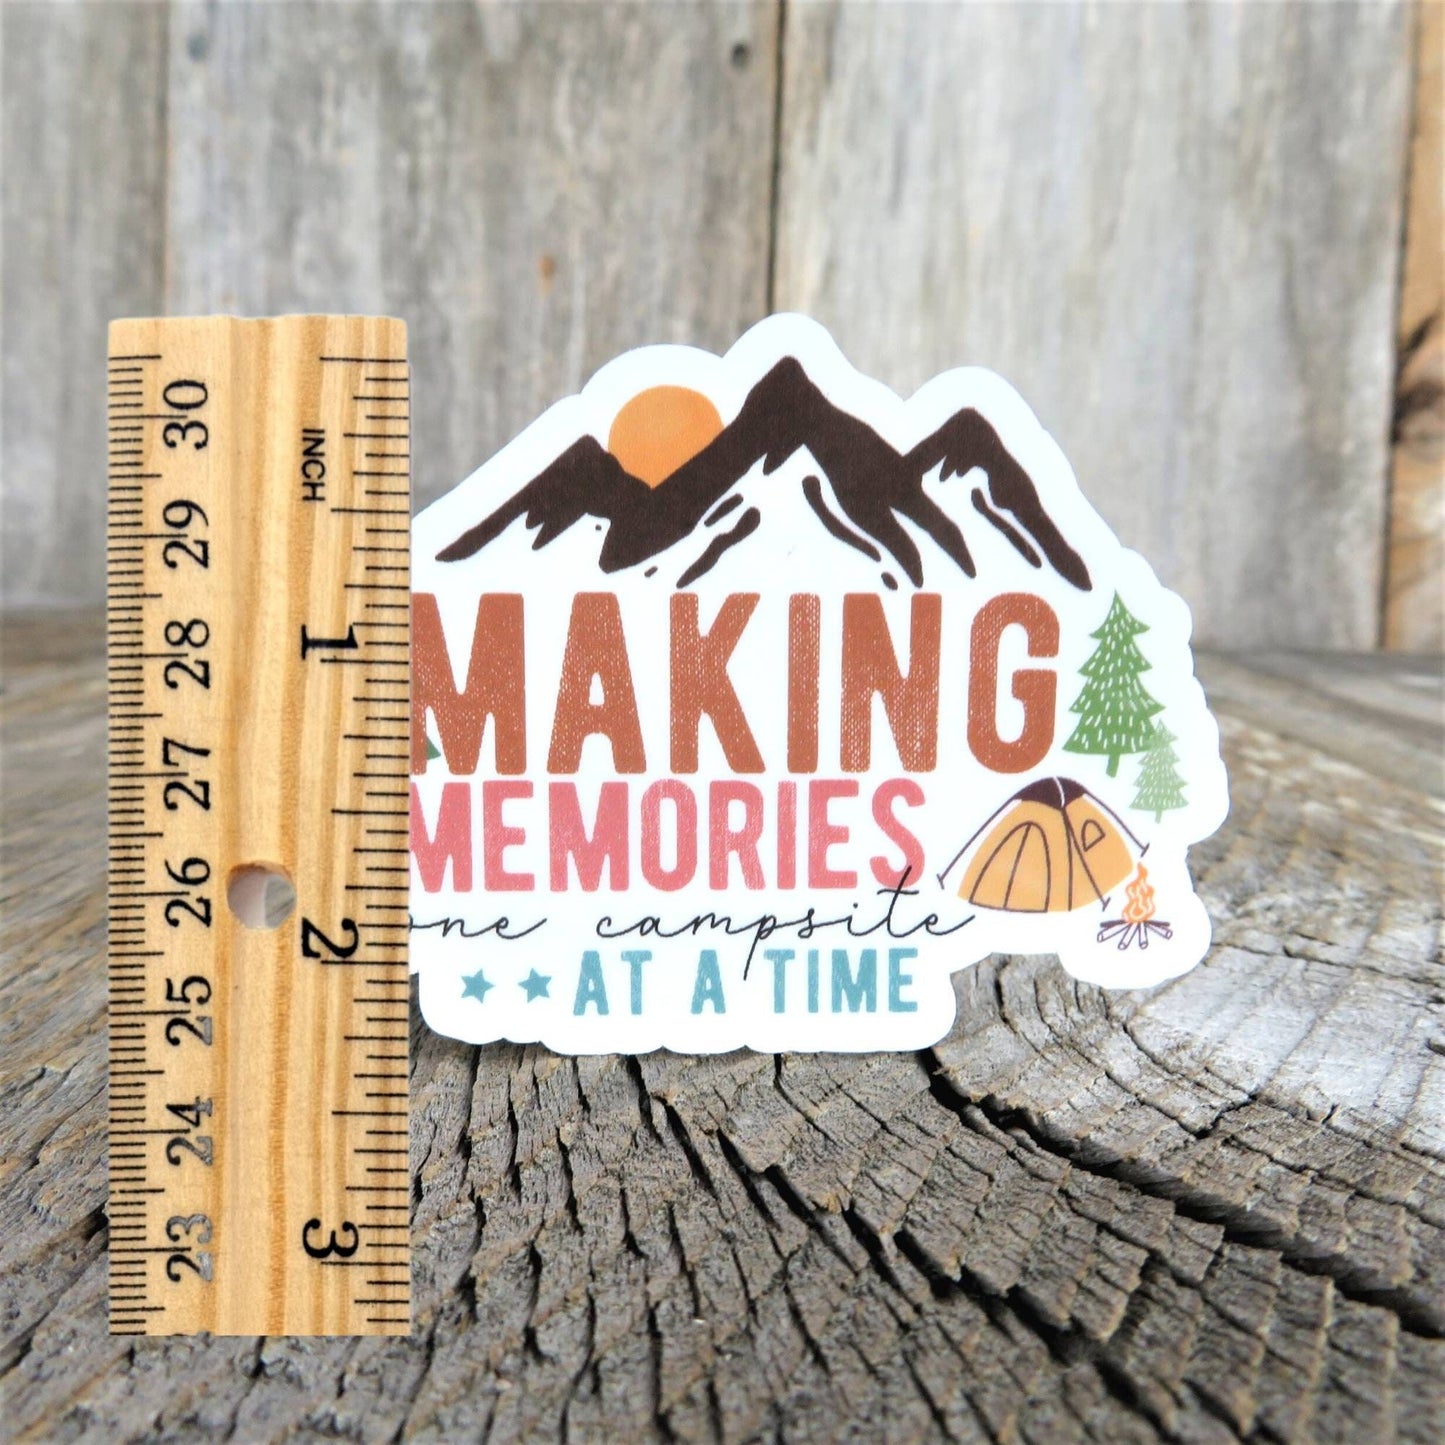 Making Memories One Campsite At A Time Sticker Full Color Waterproof Outdoors Camping Mountains Water Bottle Sticker